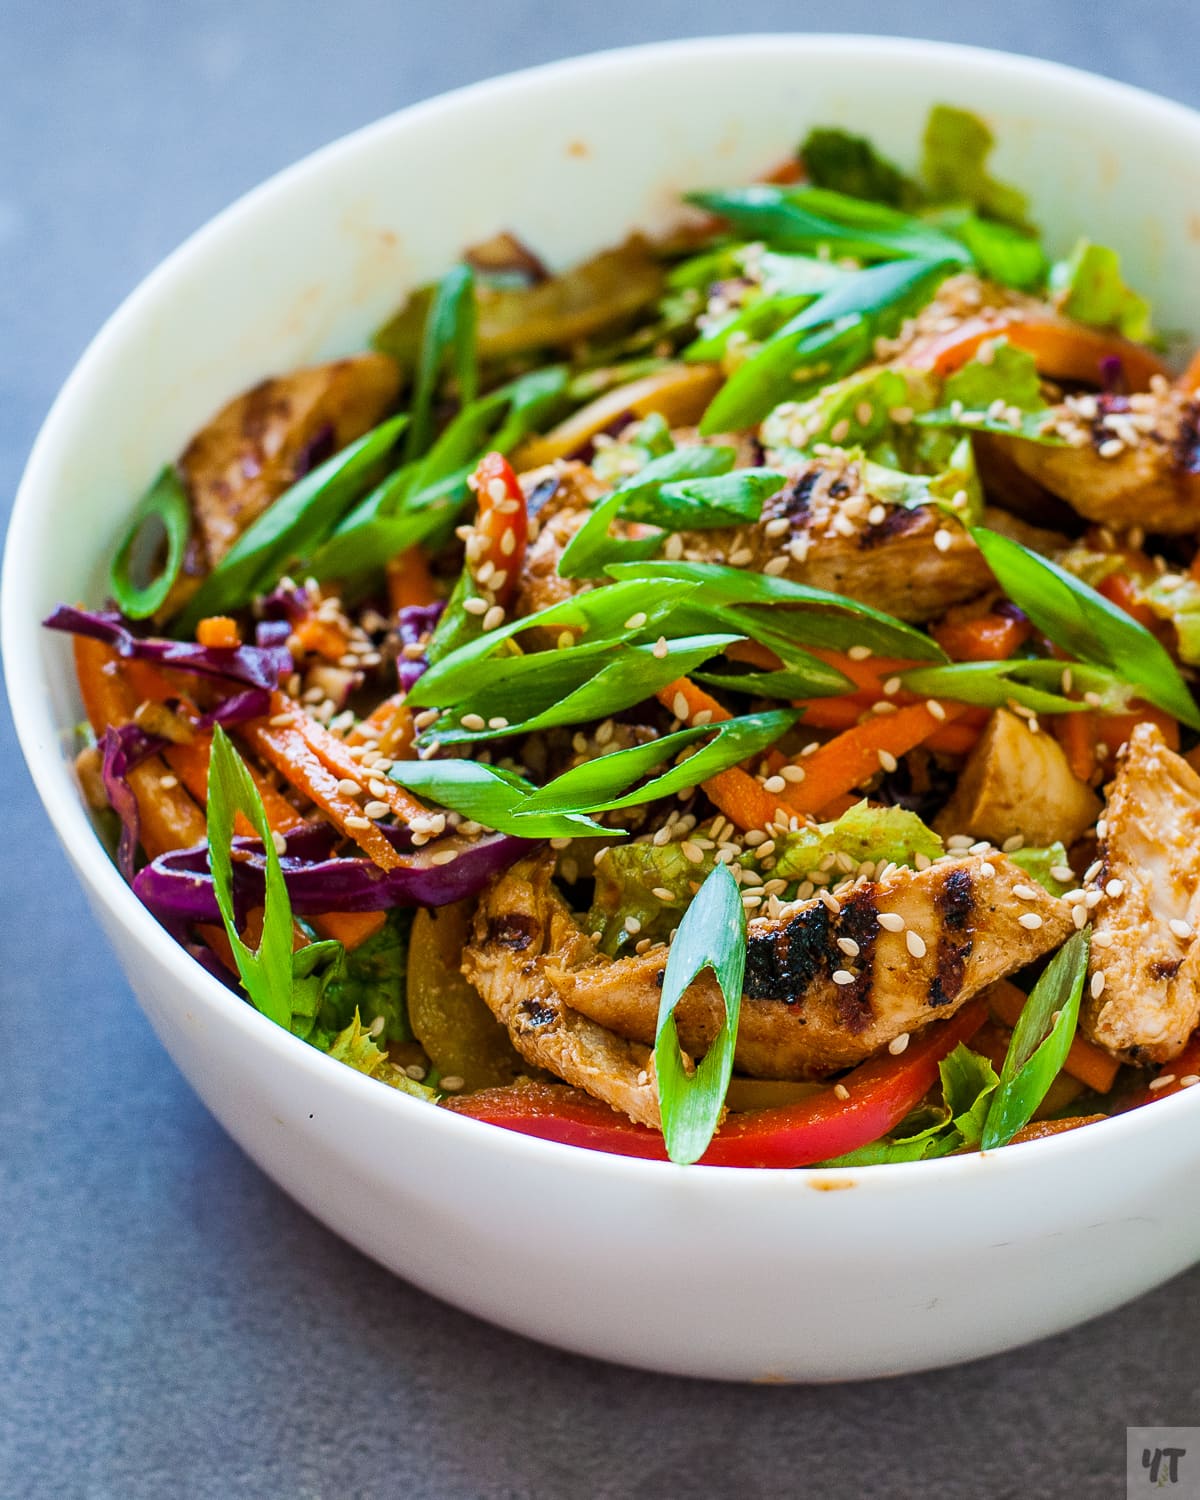 Asian Grilled Chicken Salad in Peanut butter & Chilli Dressing - Low calorie, dairy free,Gluten Free Salad recipe with an asian inspired dressing. #salad #asiansalad #chicken #chickensalad #peanutbuttterdressing #peanutbutter #chickentenders